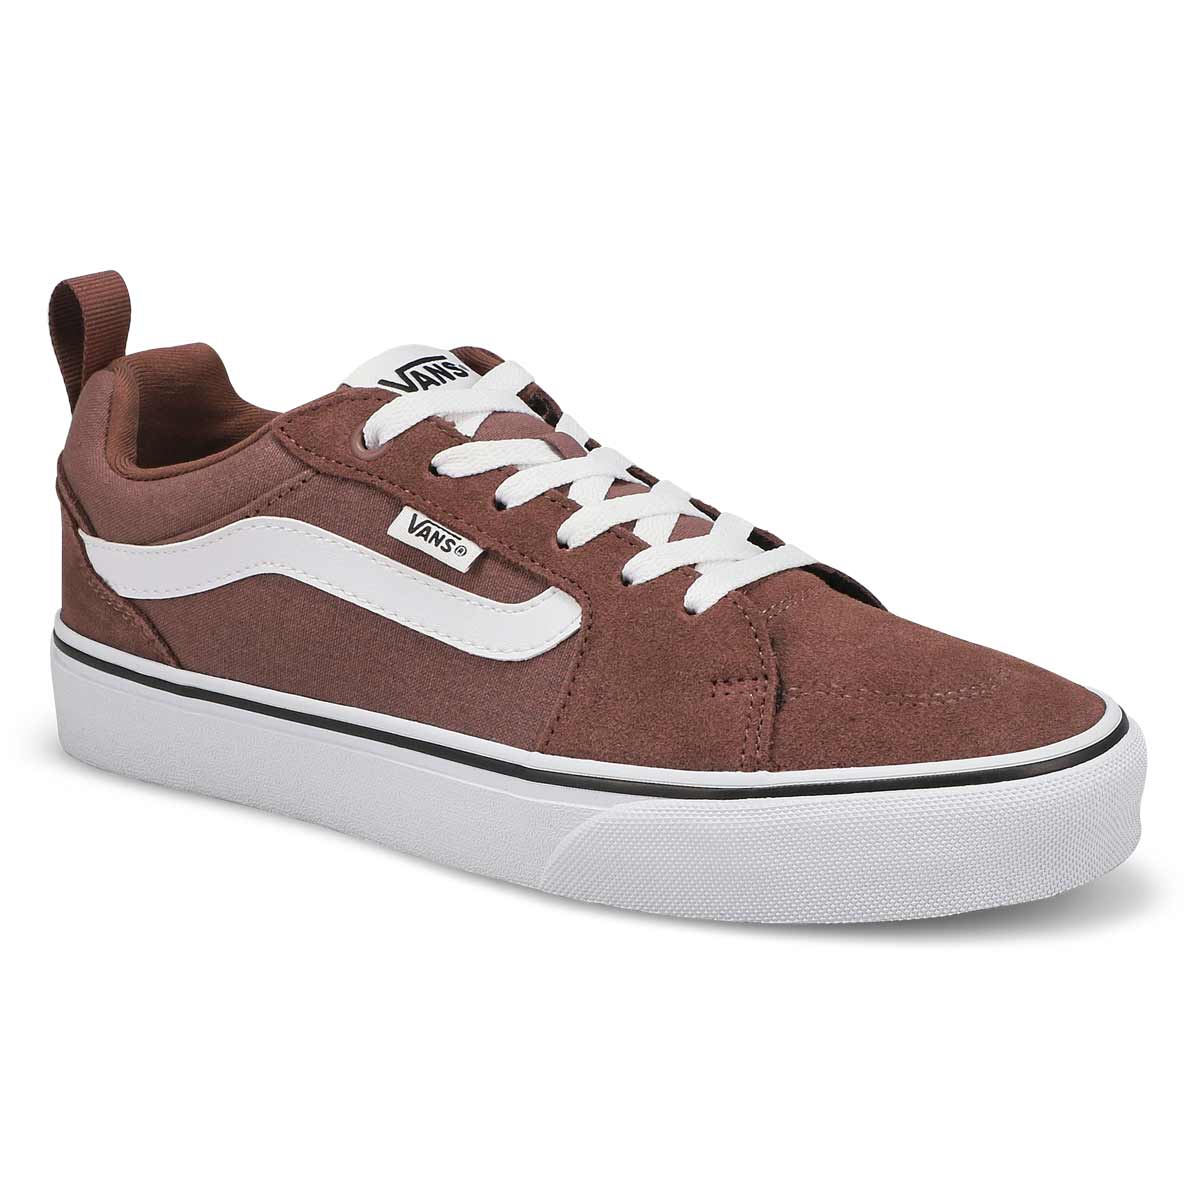 Mens Filmore Lace Up Sneaker - Taupe/White